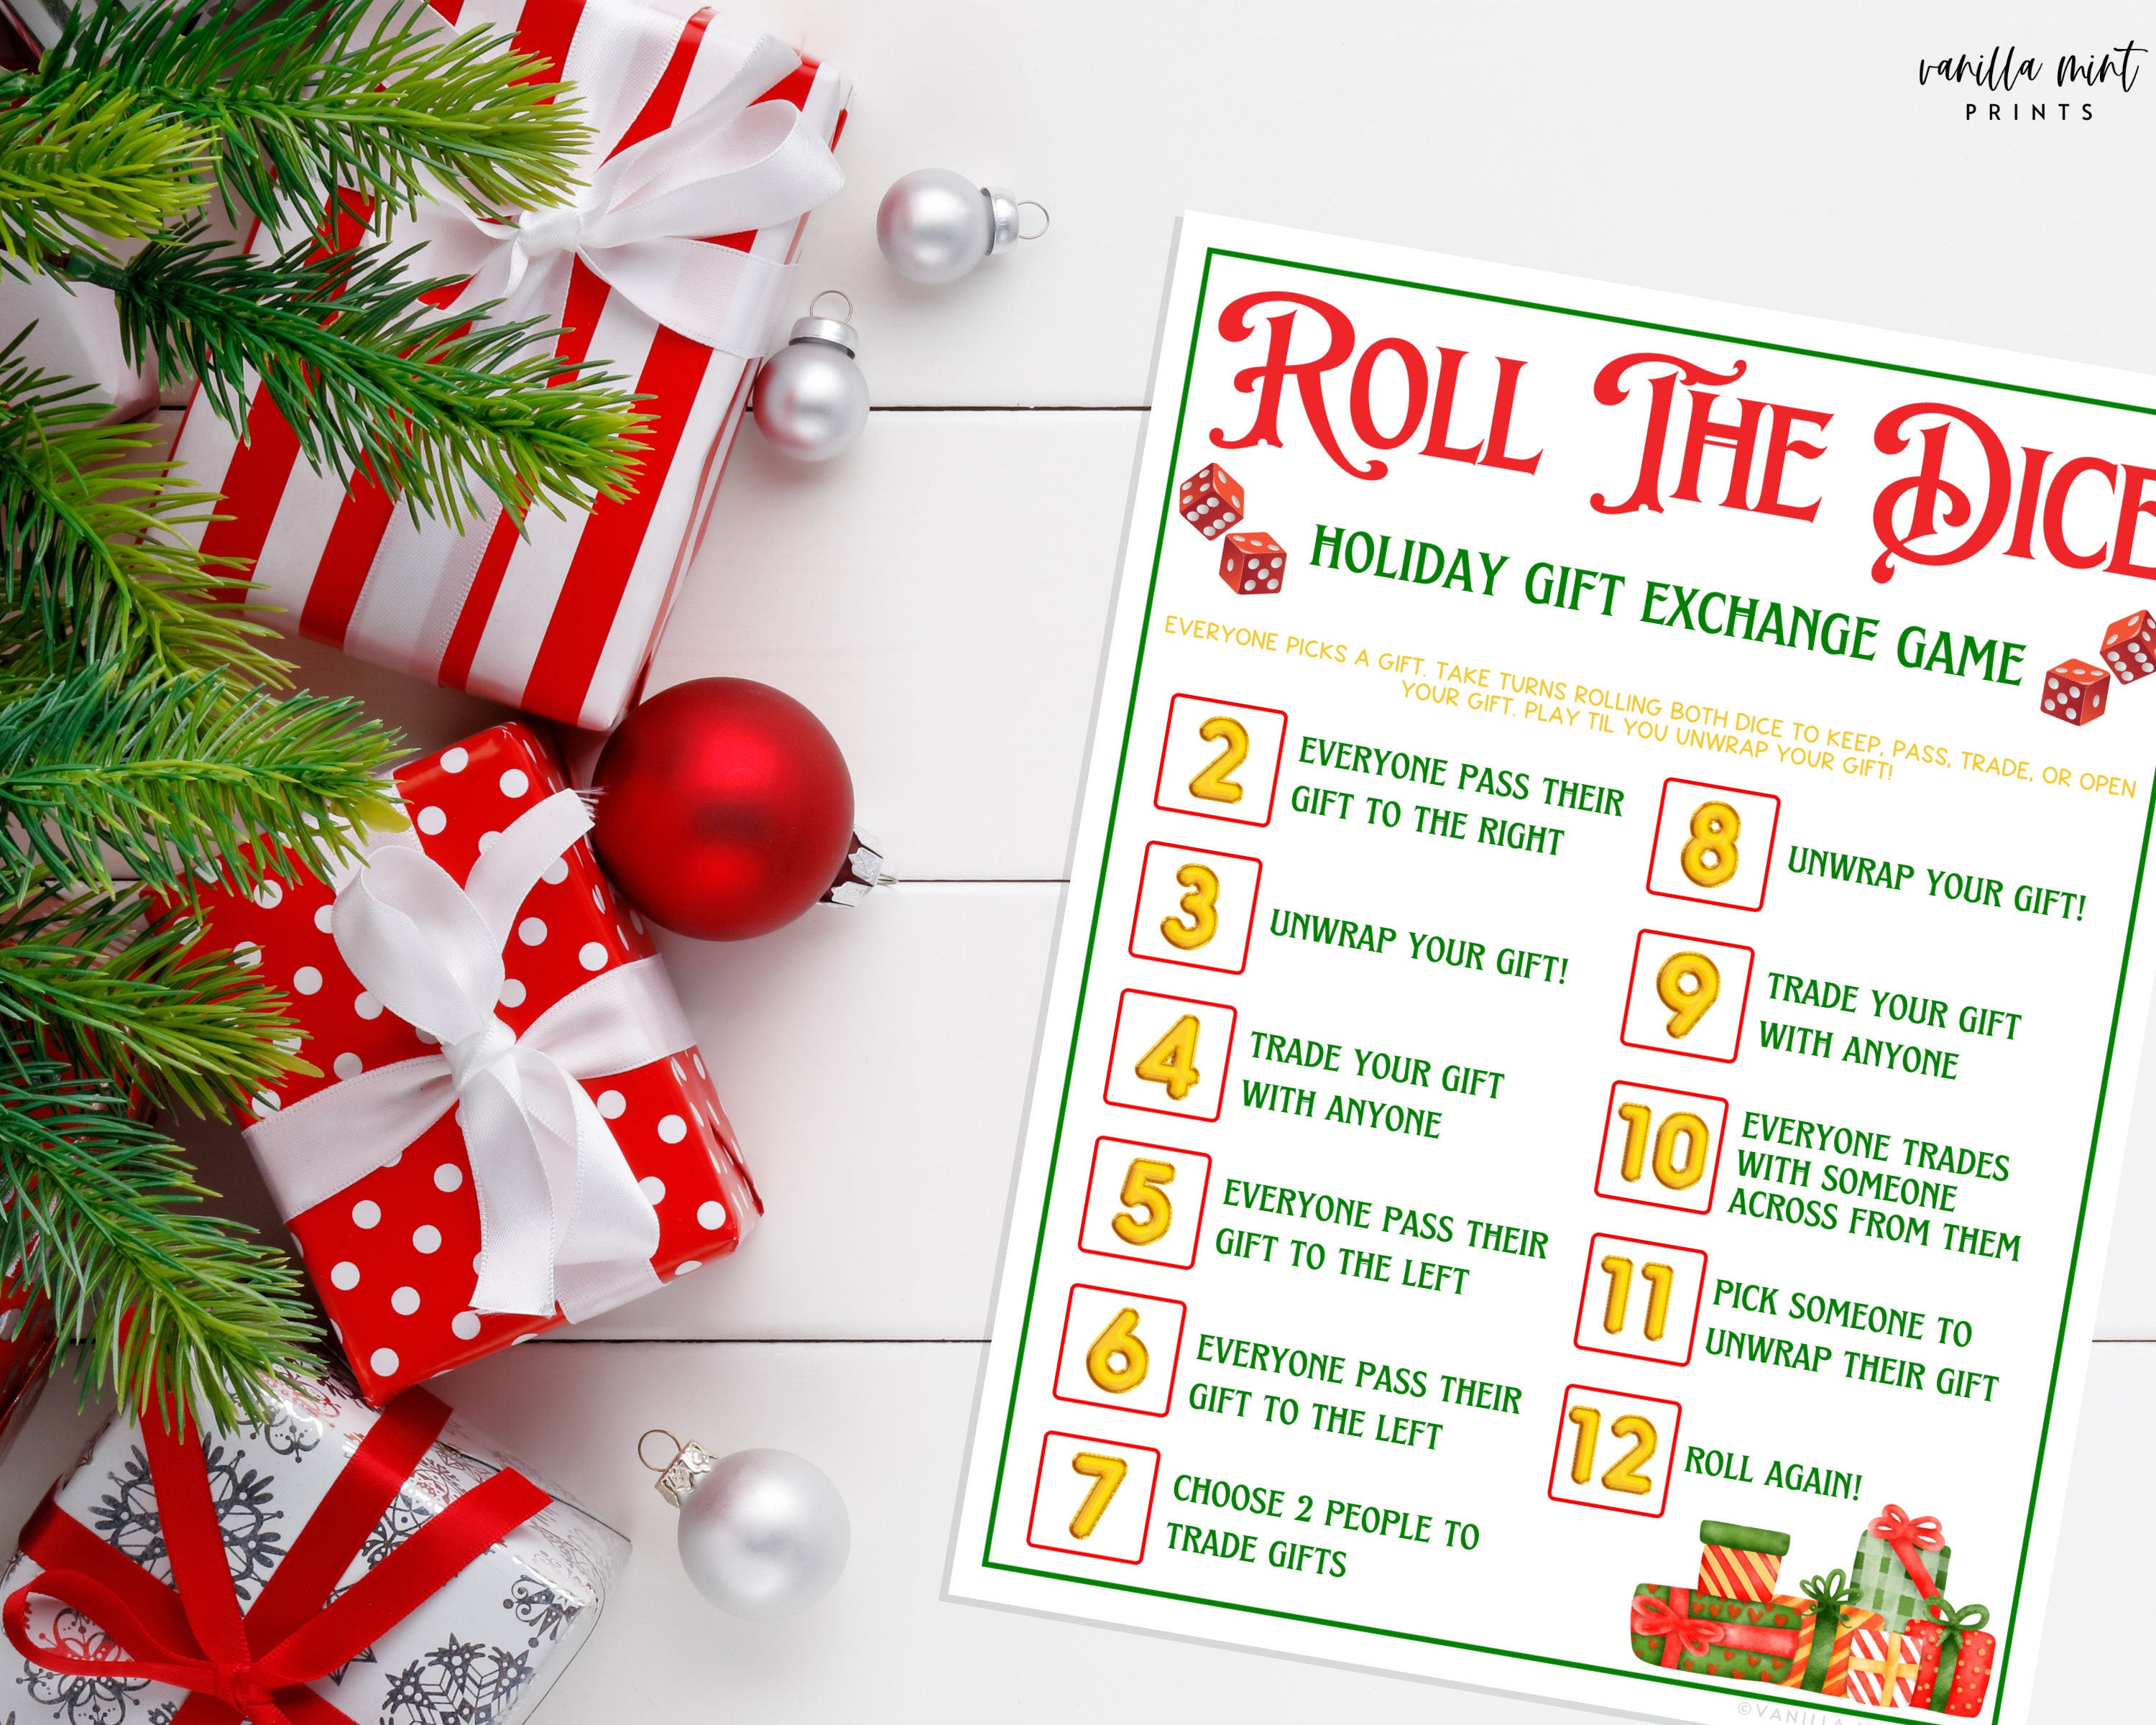 Christmas White Elephant Gift Exchange Rules Printable, Christmas Gift  Exchange Dice Game Rules, Christmas Game INSTANT DOWNLOAD CG13 